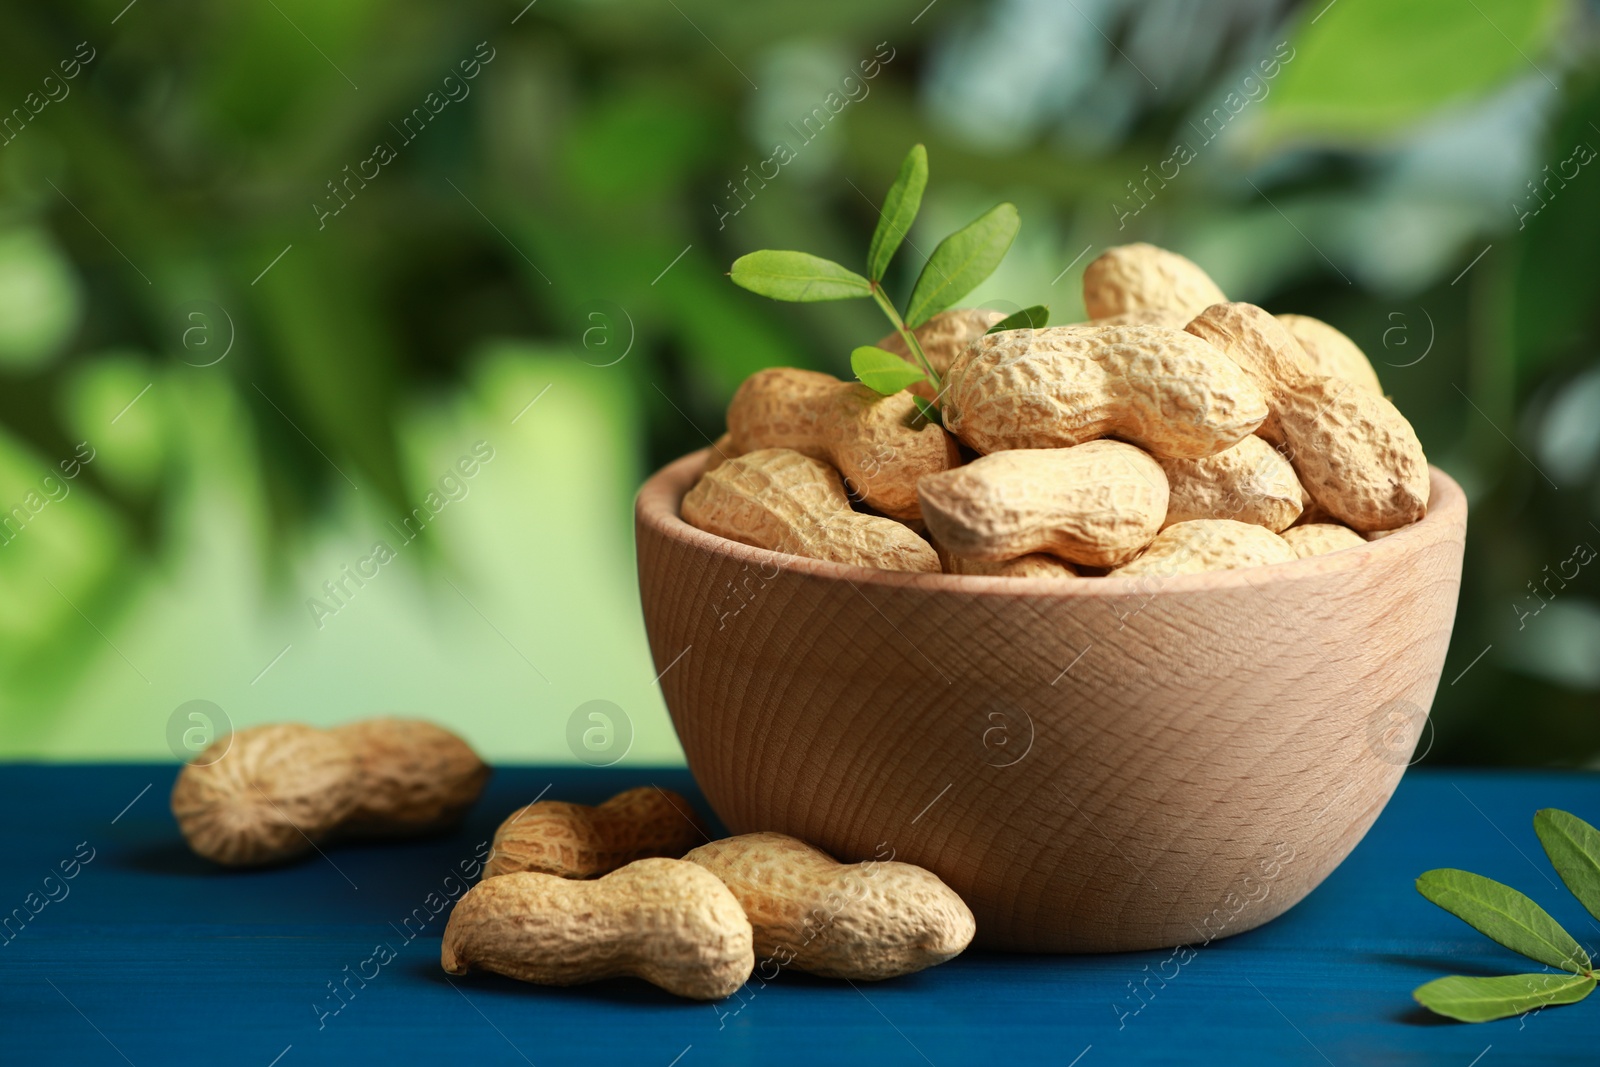 Photo of Fresh unpeeled peanuts in bowl and twigs on blue wooden table against blurred background